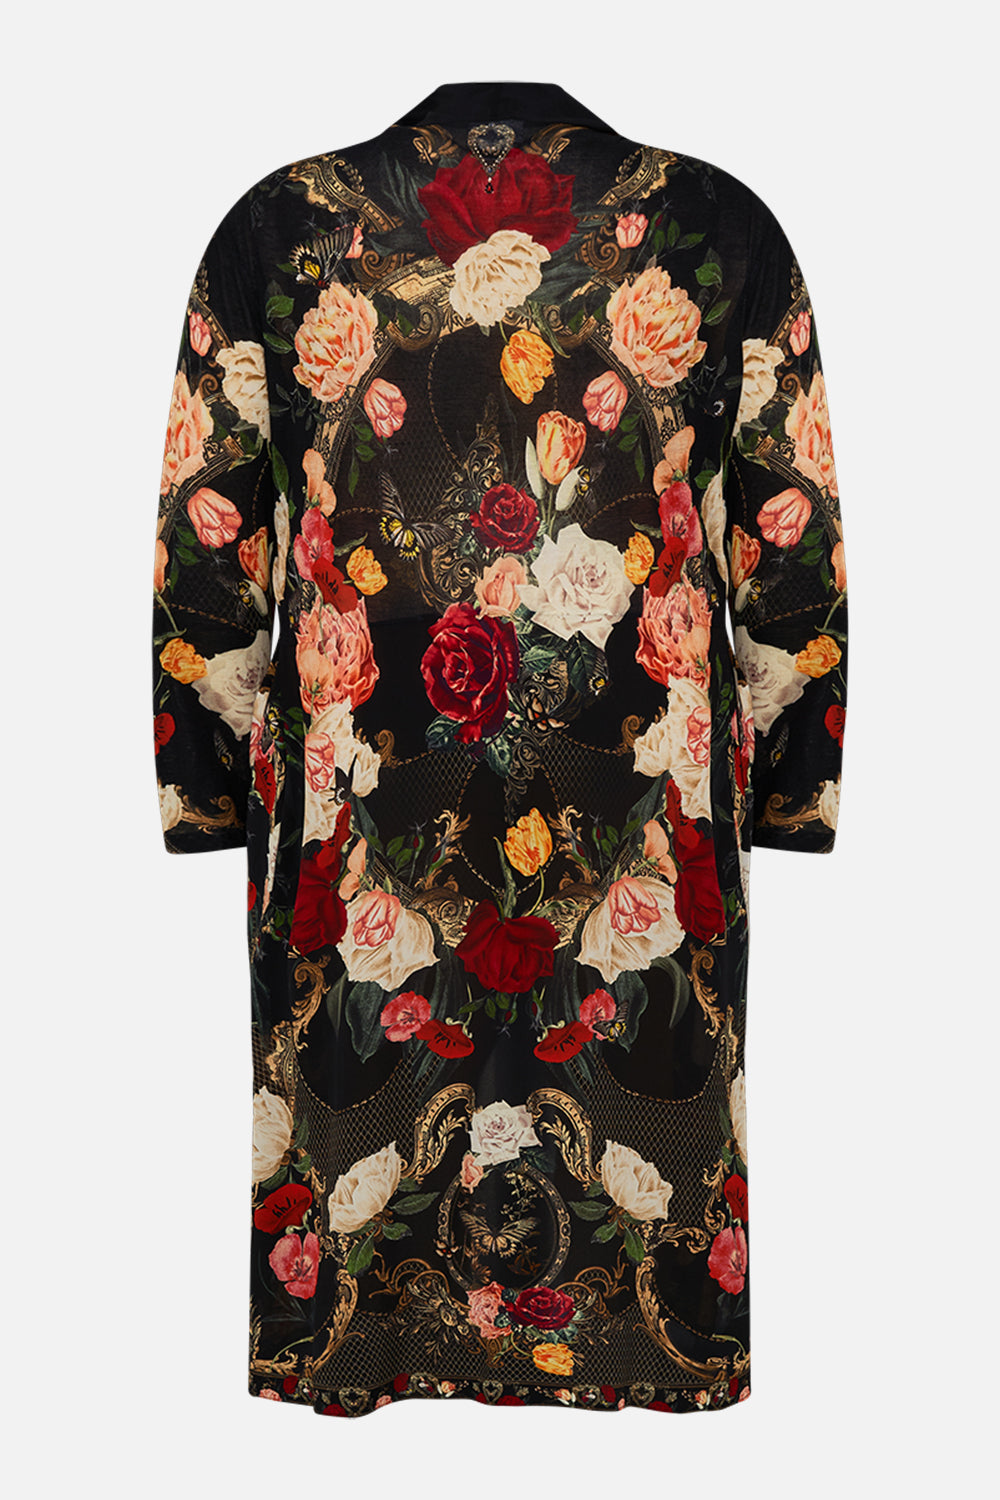 CAMILLA Black Long Casual Jacket with Pockets in Magic in the Manuscripts